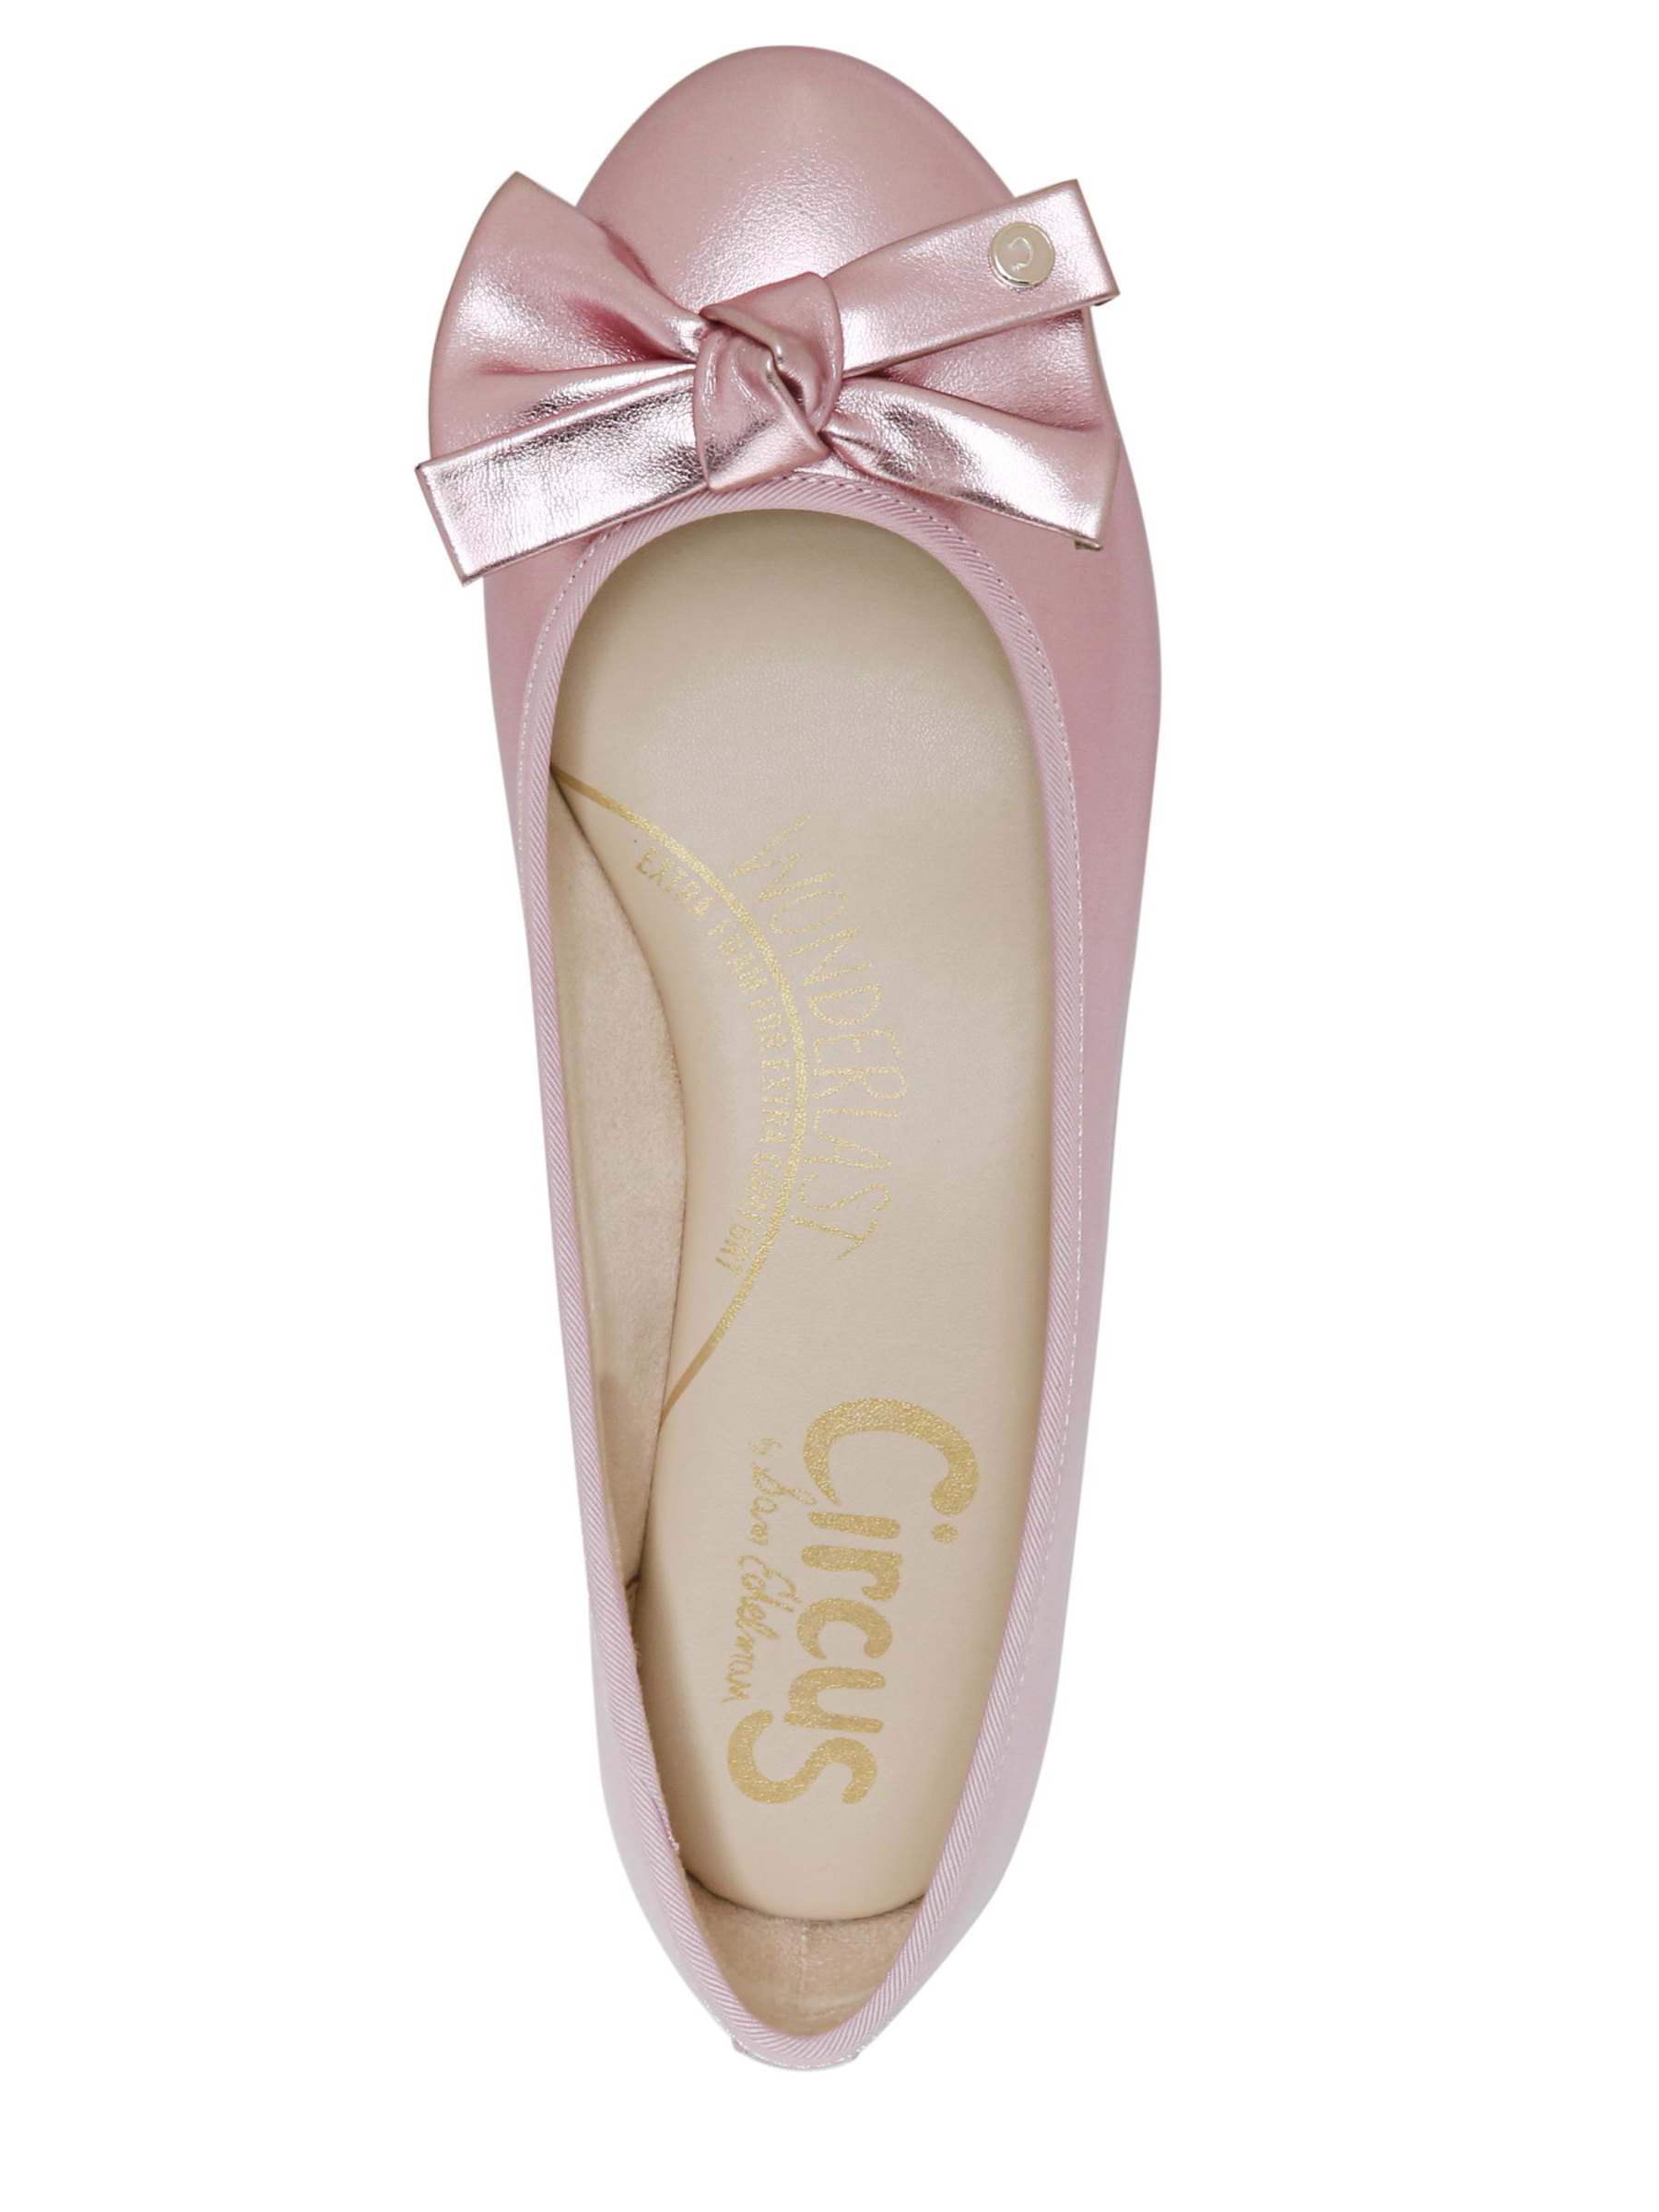 Circus by Sam Edelman Women's Connie Ballet Flat - image 4 of 8